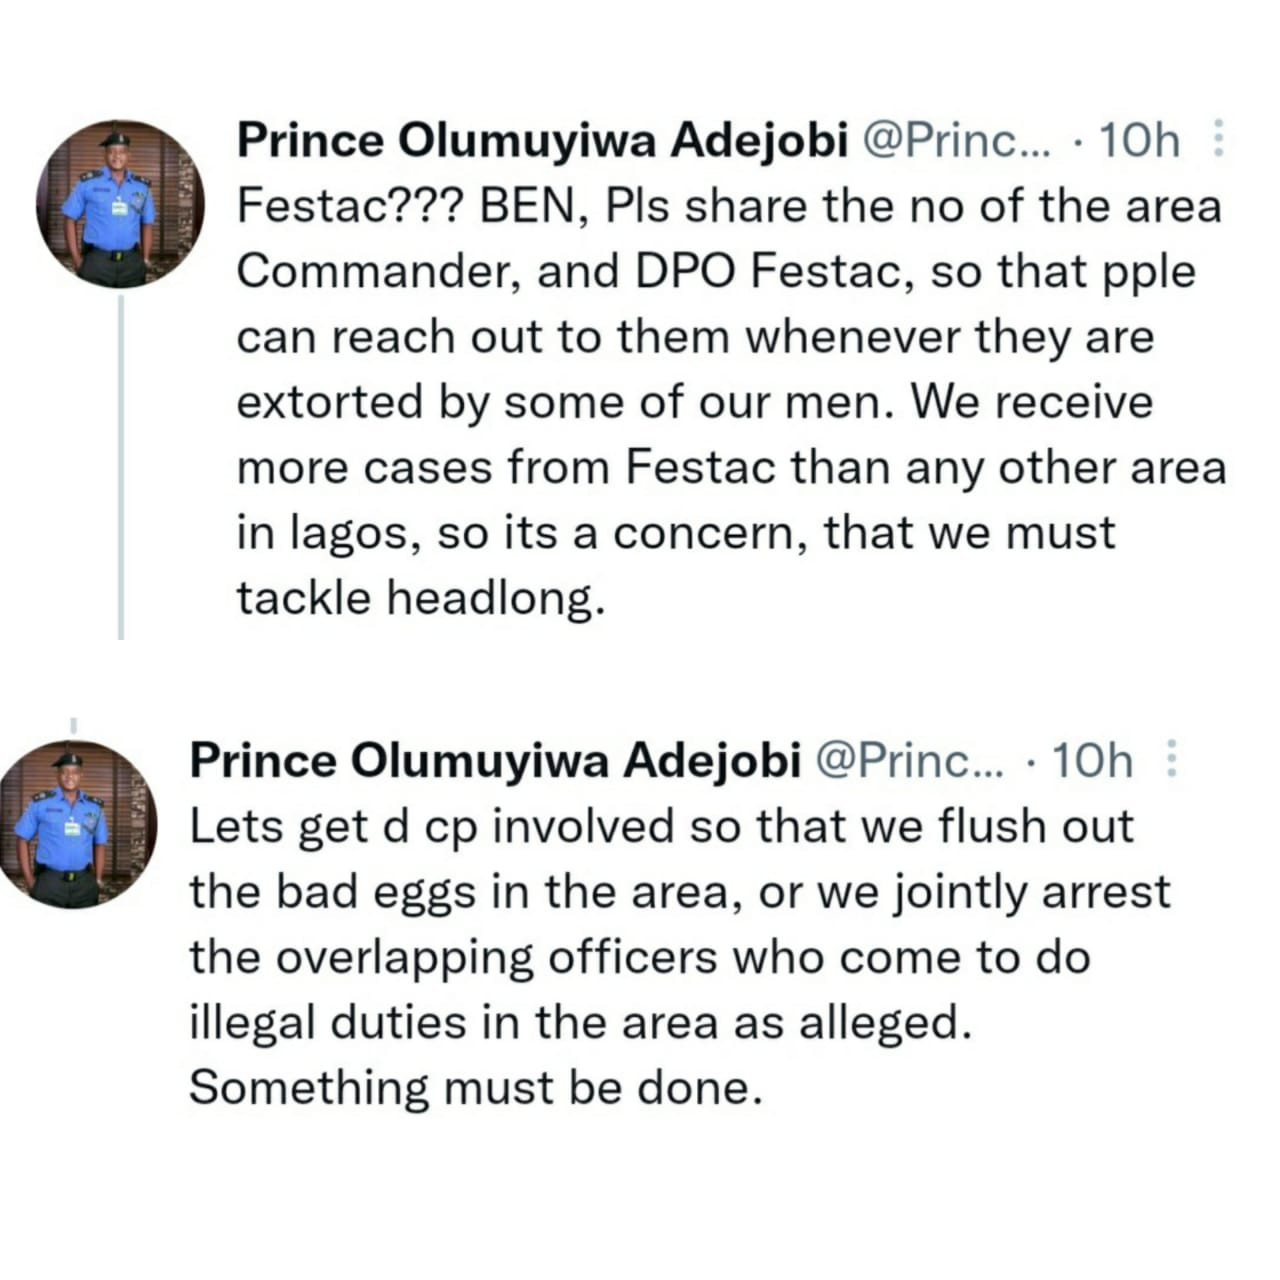 We receive more cases of extortion from Festac more than any other area in Lagos - Police PRO, Olumuyiwa Adejobi, says